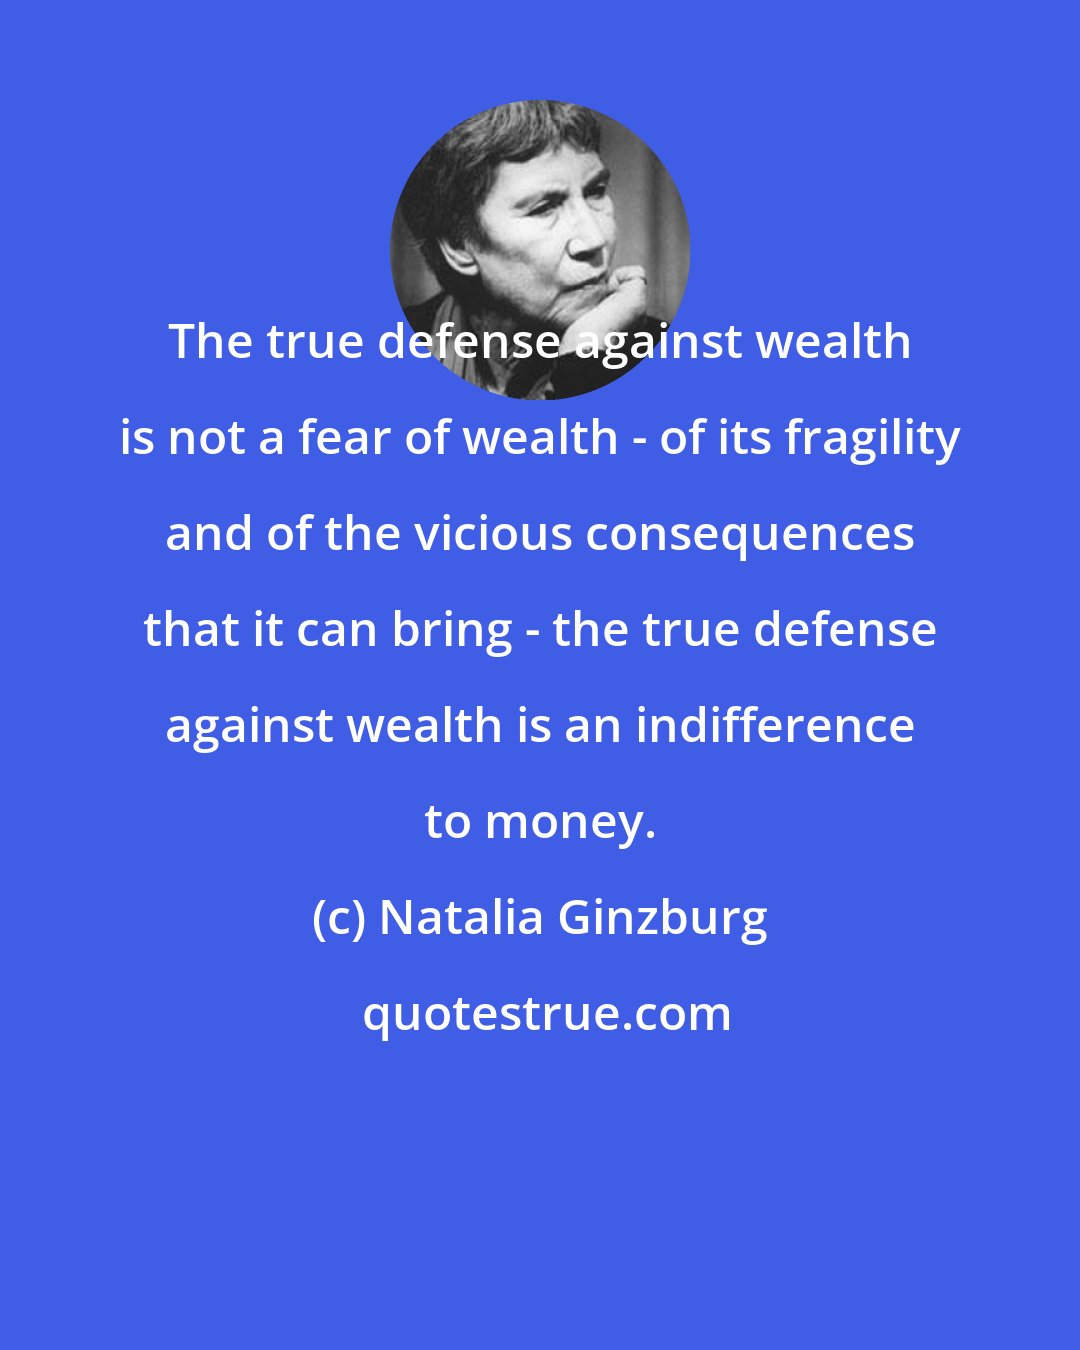 Natalia Ginzburg: The true defense against wealth is not a fear of wealth - of its fragility and of the vicious consequences that it can bring - the true defense against wealth is an indifference to money.